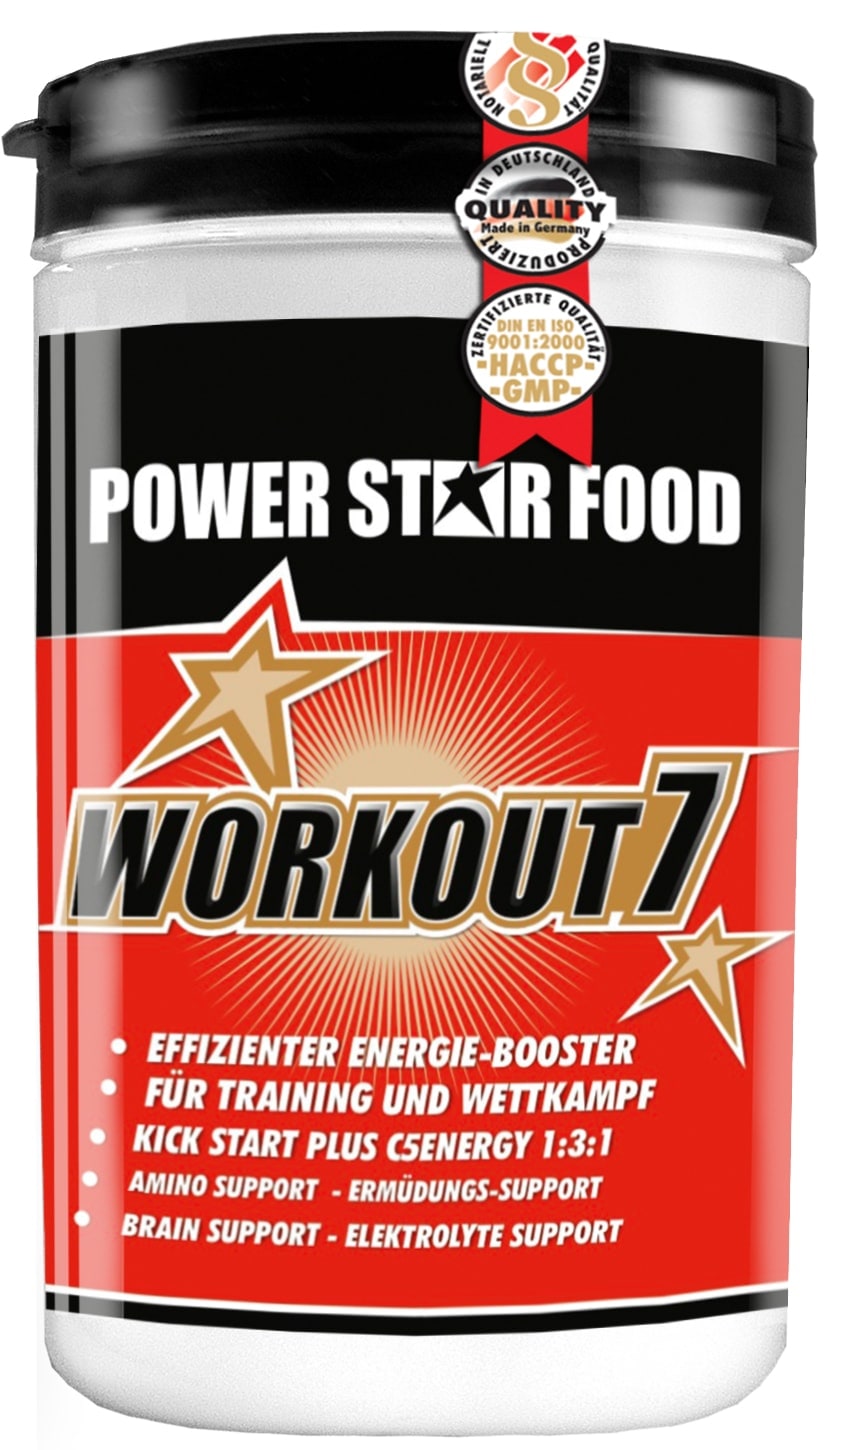 Booster Workout 7